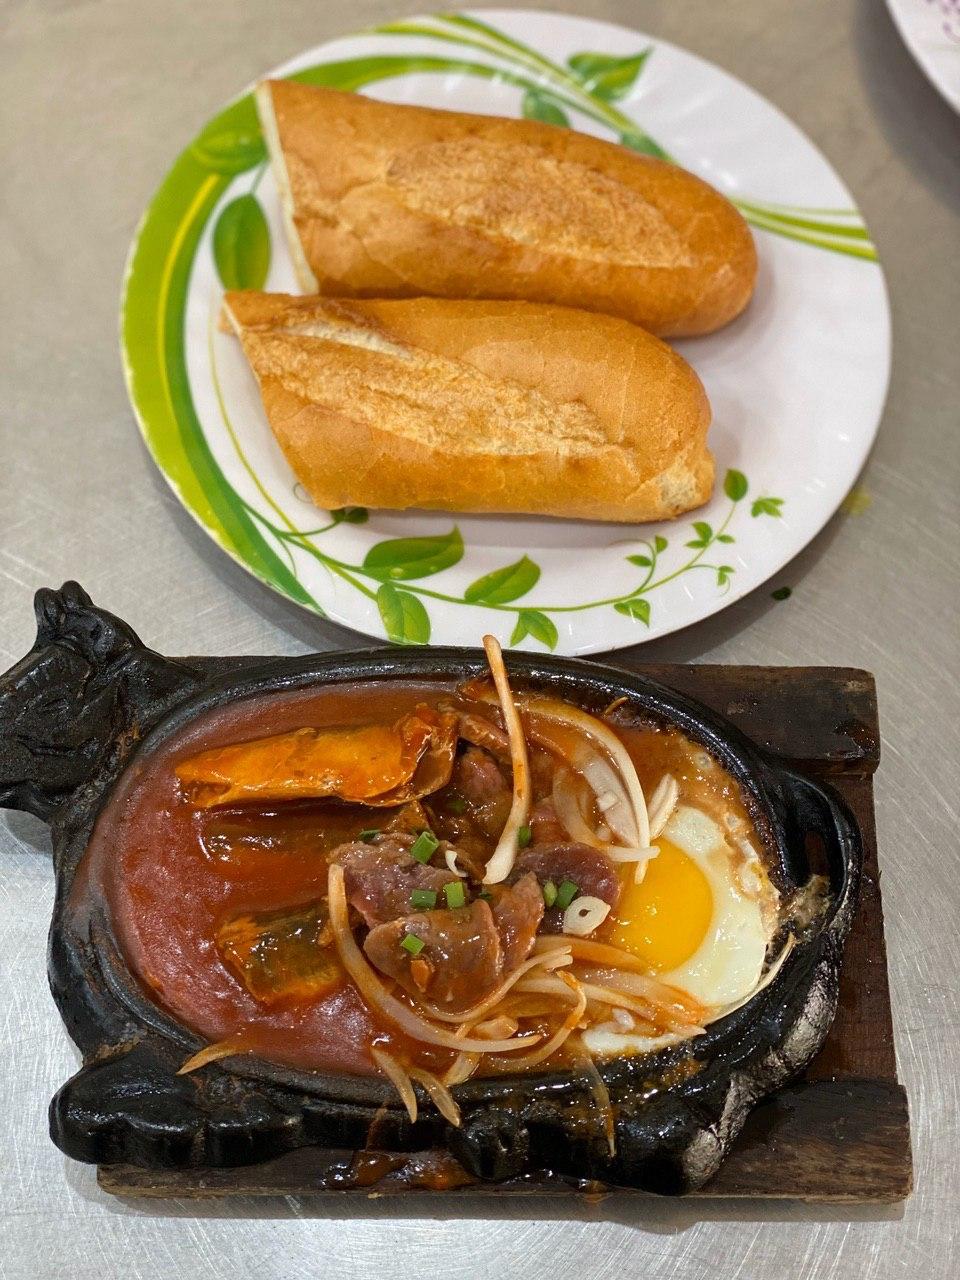 12.Braised Fish on Hot Pan with Bread ,Egg